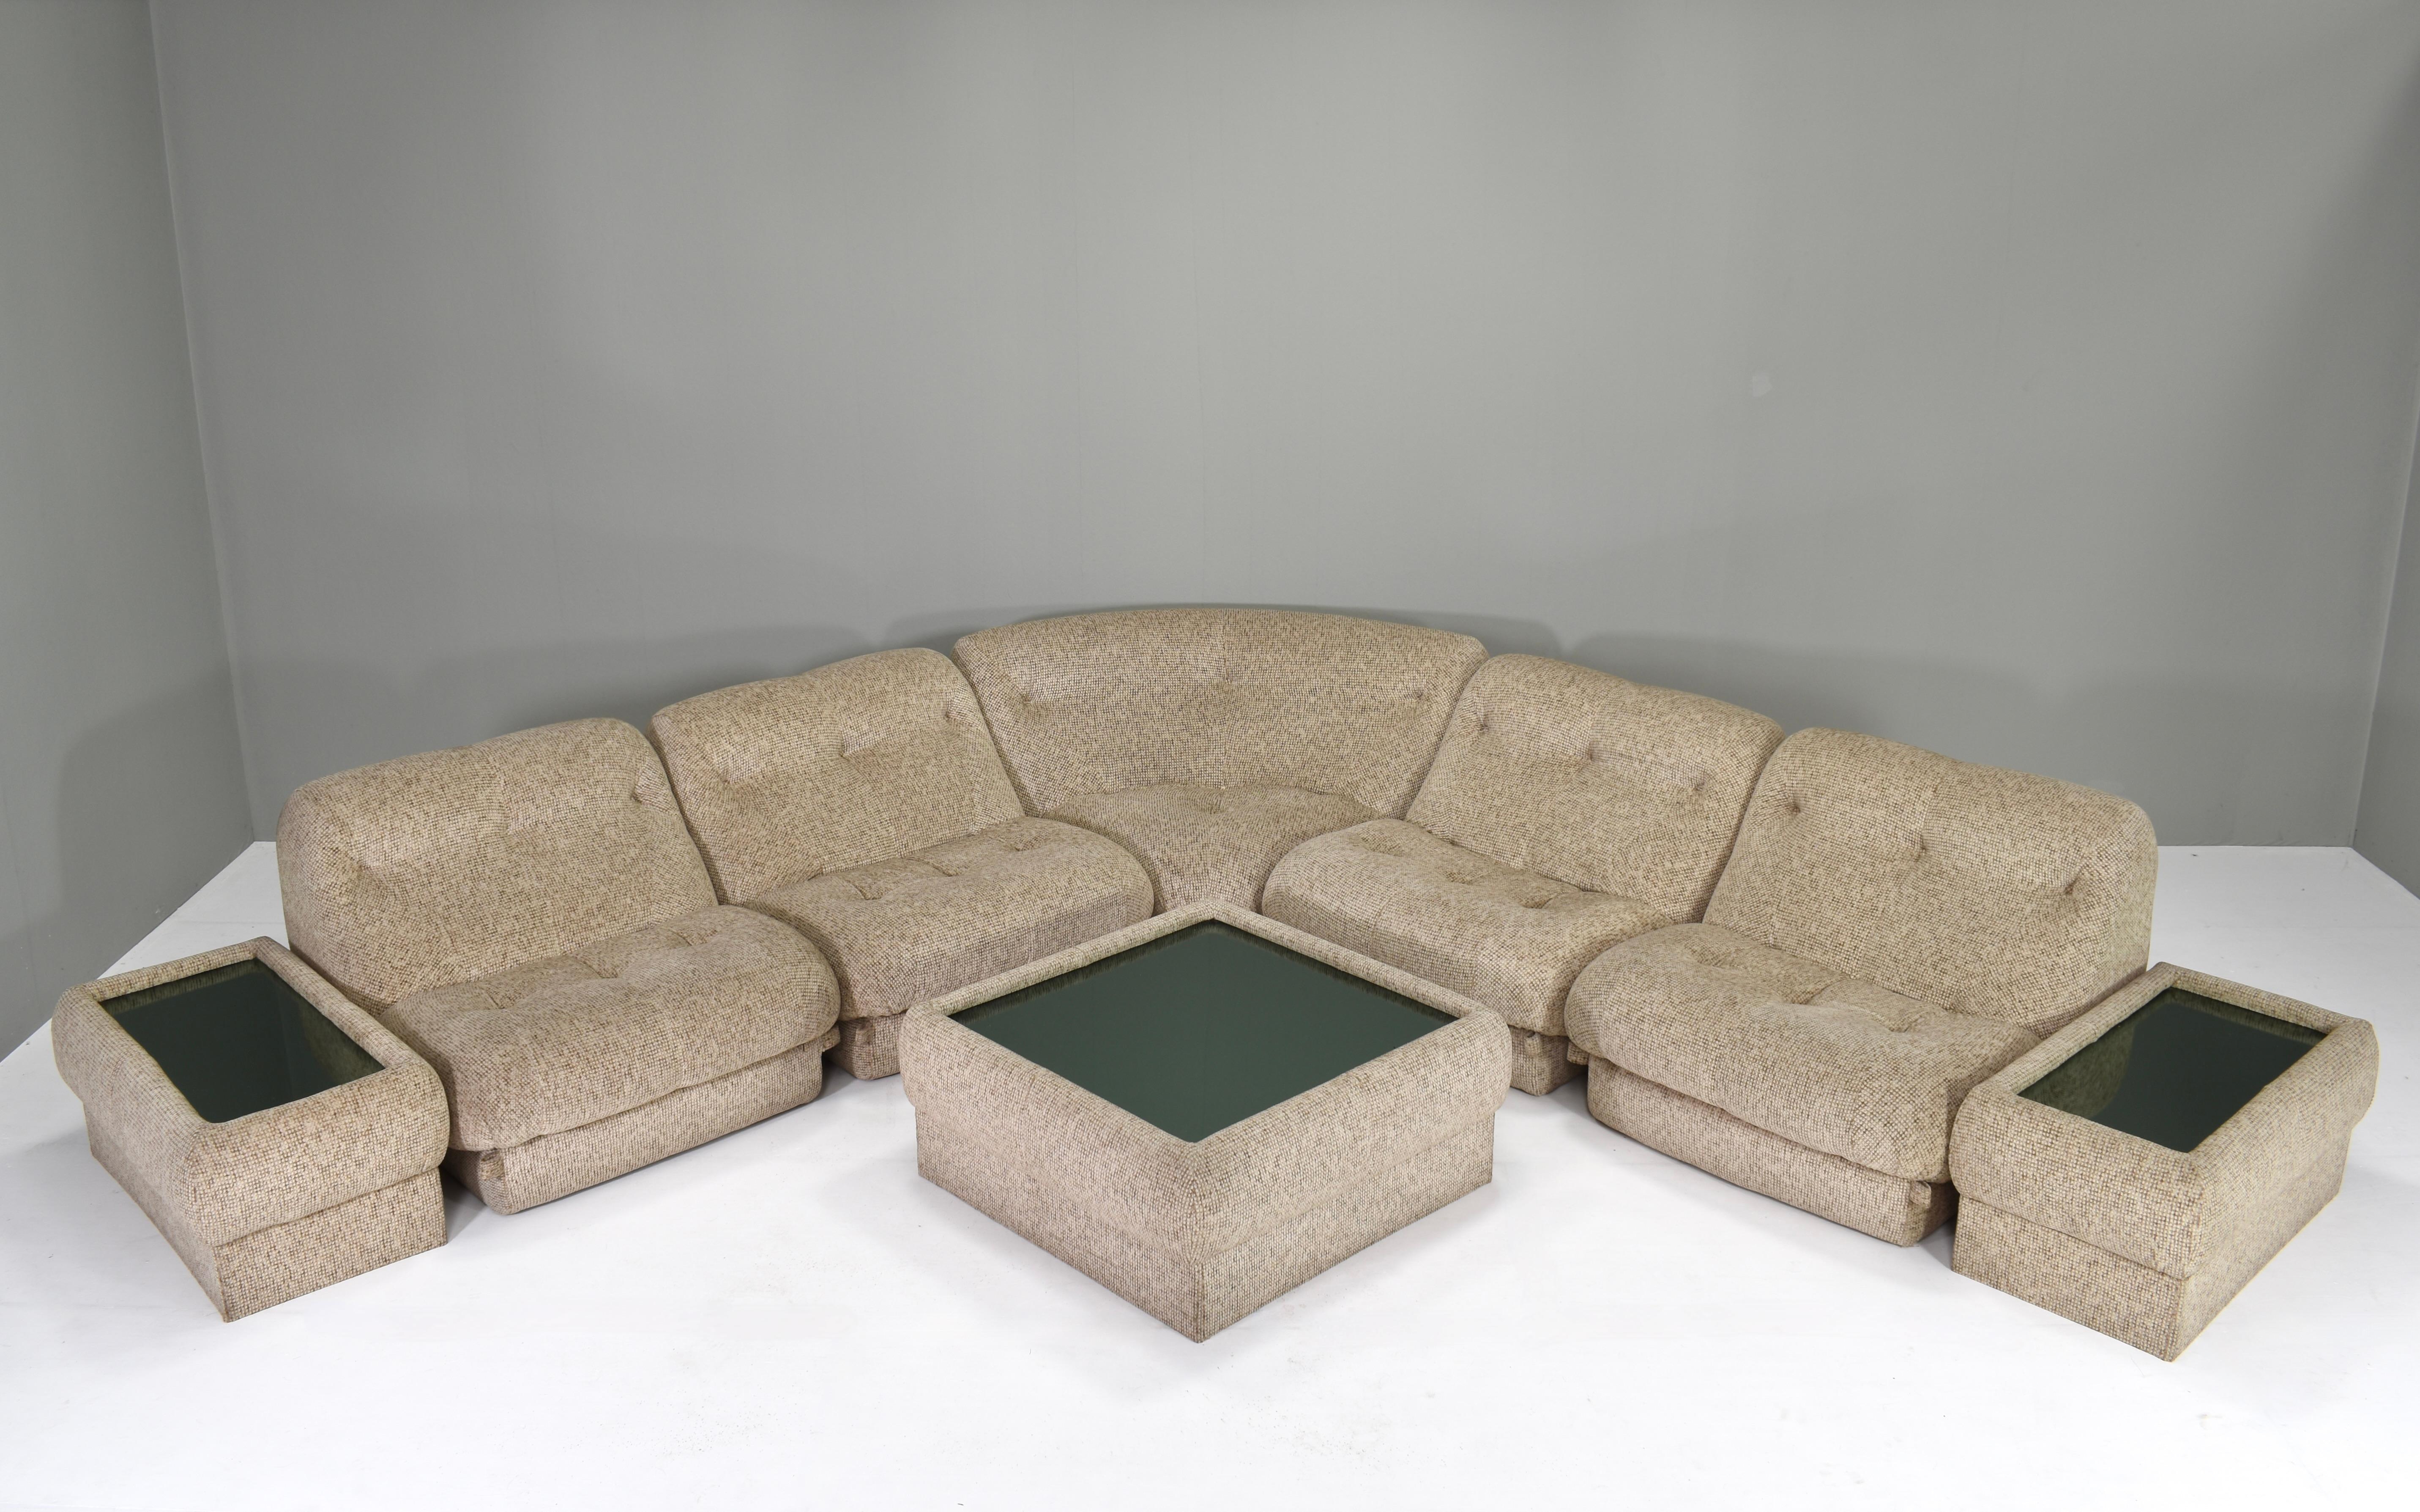 Nuvolone sectional sofa by Rino Maturi with three mirror glass coffee tables.
The sofa features 4 straight sections, 1 corner section and three coffee tables. The fabric is made of thick high-end beige/creme wool. The sofa is in very good condition